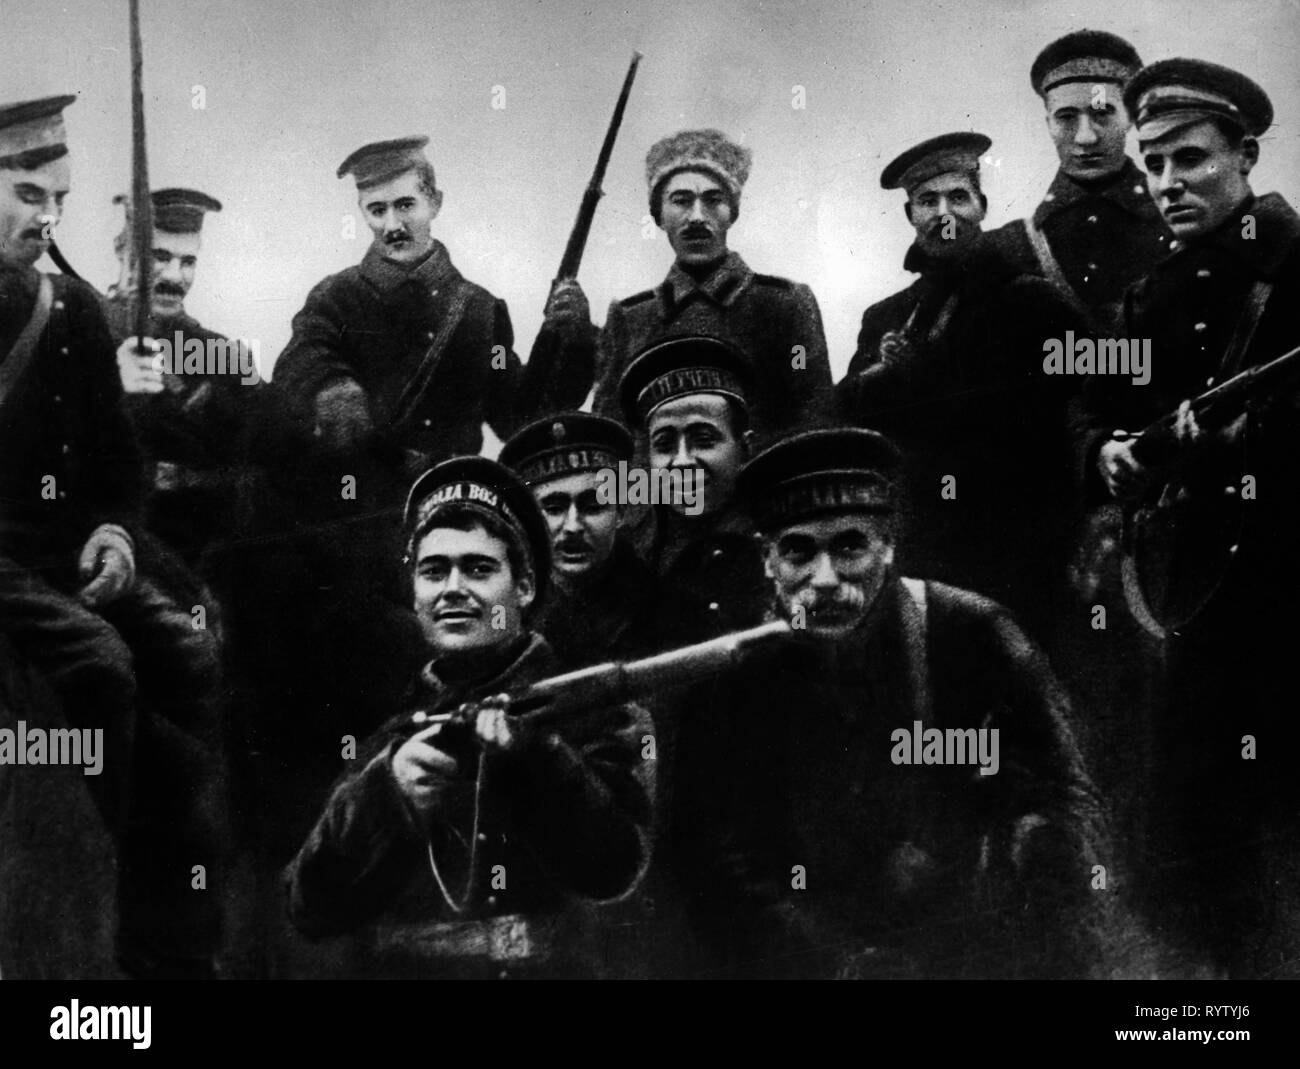 Russian Revolution 1917, October Revolution, assault on the Winter Palace, Petrograd, 8.11.1917, involved sailors of the Baltic fleet, Saint Petersburg, Winter Palace, people, military, navy, weapons, arms, weapon, arm, rifle, gun, rifles, guns, revolutionist, revolutionists, 26.10.1917, Russia, Russian Republic, 1910s, 20th century, revolution, revolutions, person involved, party, the parties concerned, all parties concerned, sailor, seaman, sailors, seamen, fleet, fleets, historic, historical, Additional-Rights-Clearance-Info-Not-Available Stock Photo